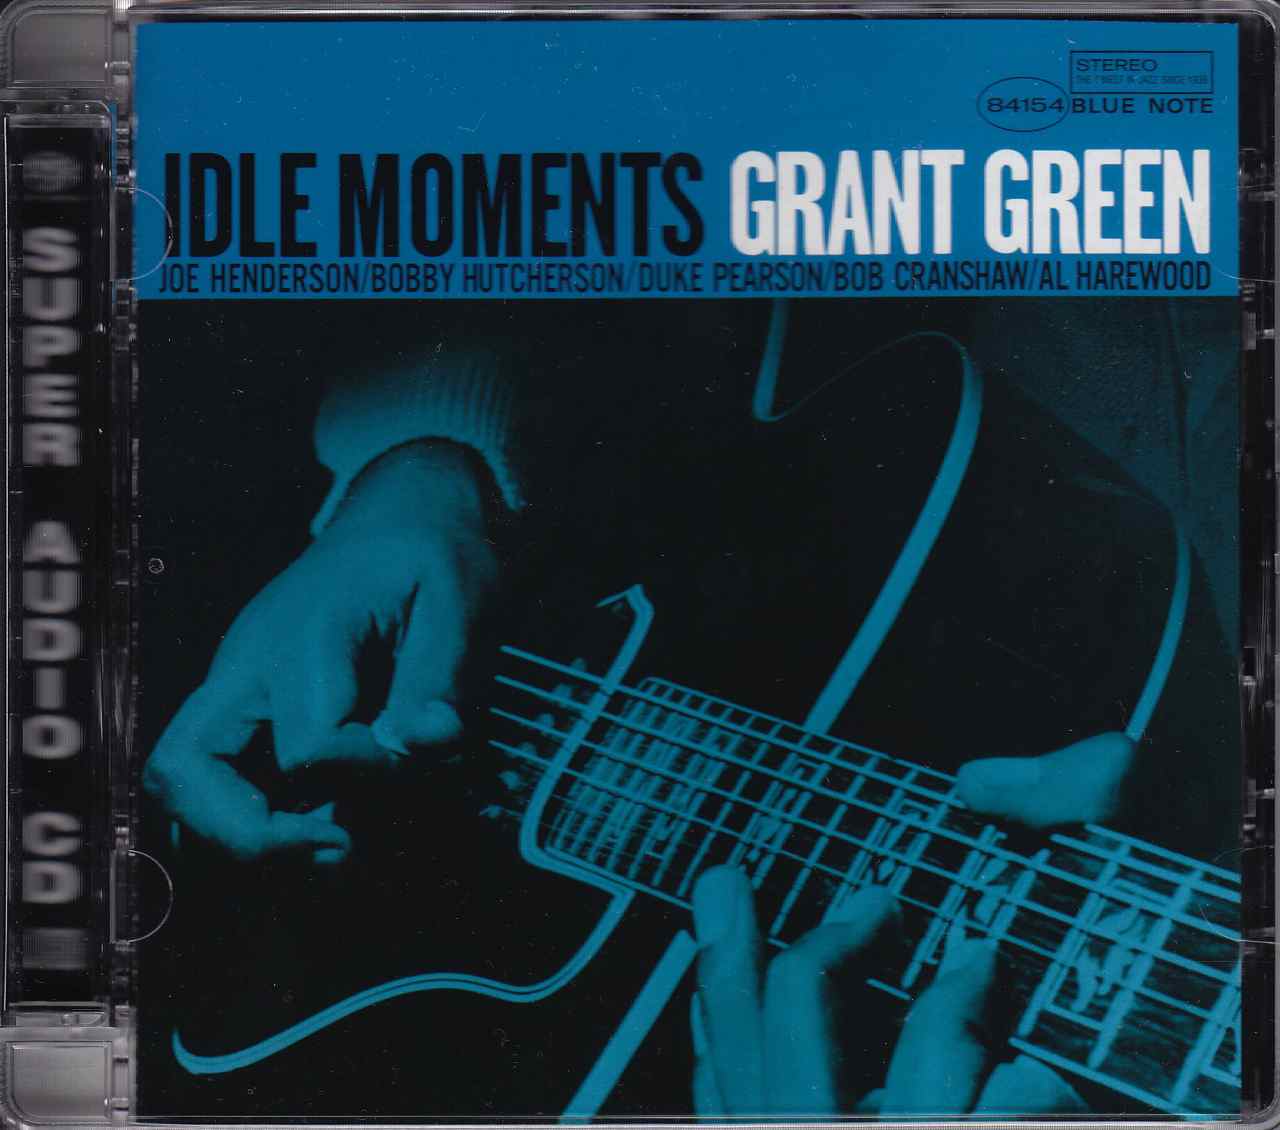 Grant Green – Idle Moments (1965) [Analogue Productions 2010] {SACD ISO + FLAC 24bit/88.2kHz}